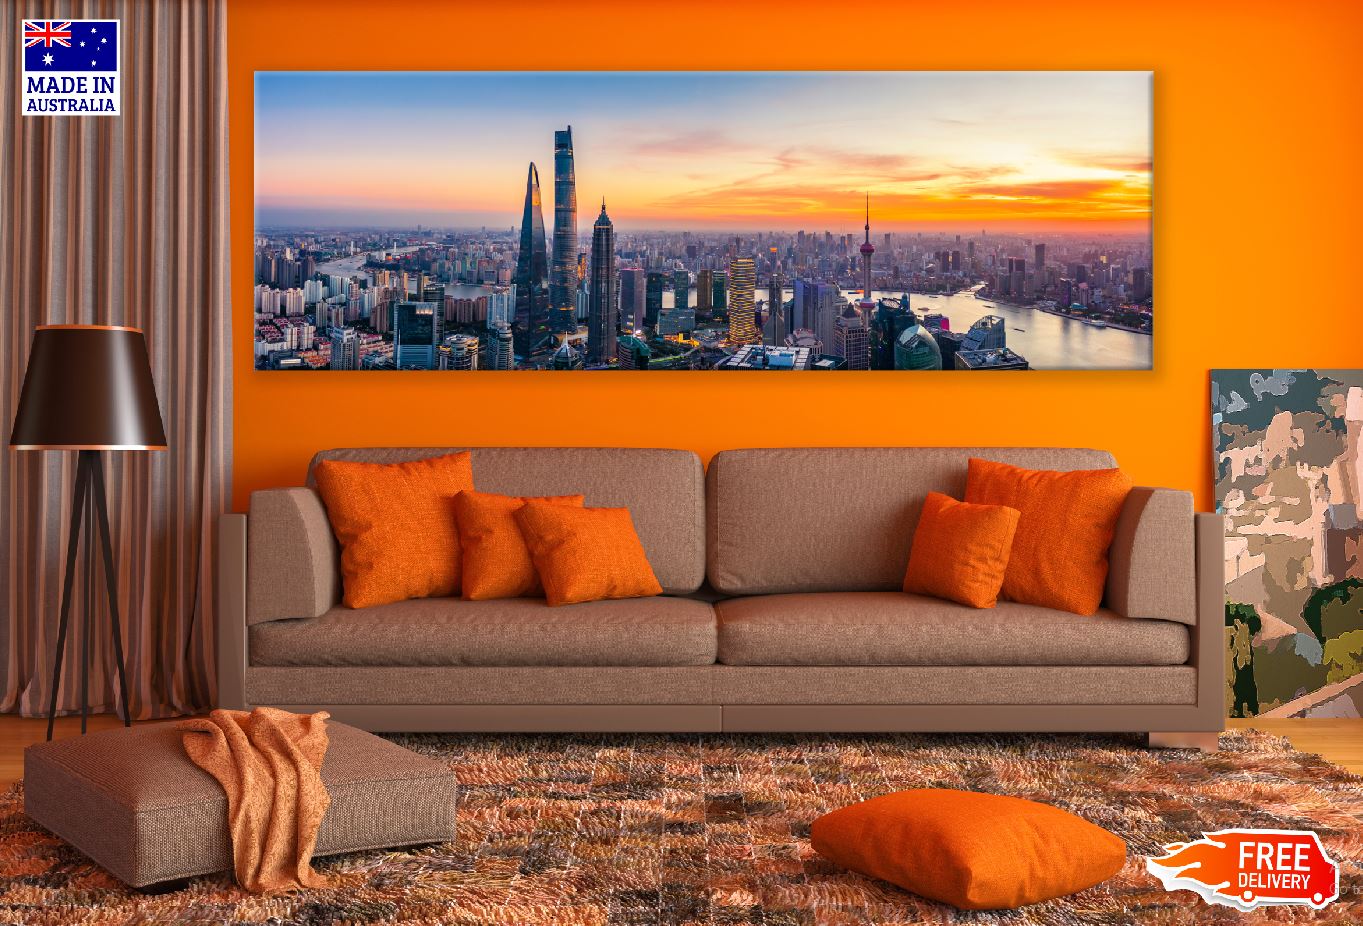 Panoramic Canvas Shanghai City View Photograph High Quality 100% Australian Made Wall Canvas Print Ready to Hang